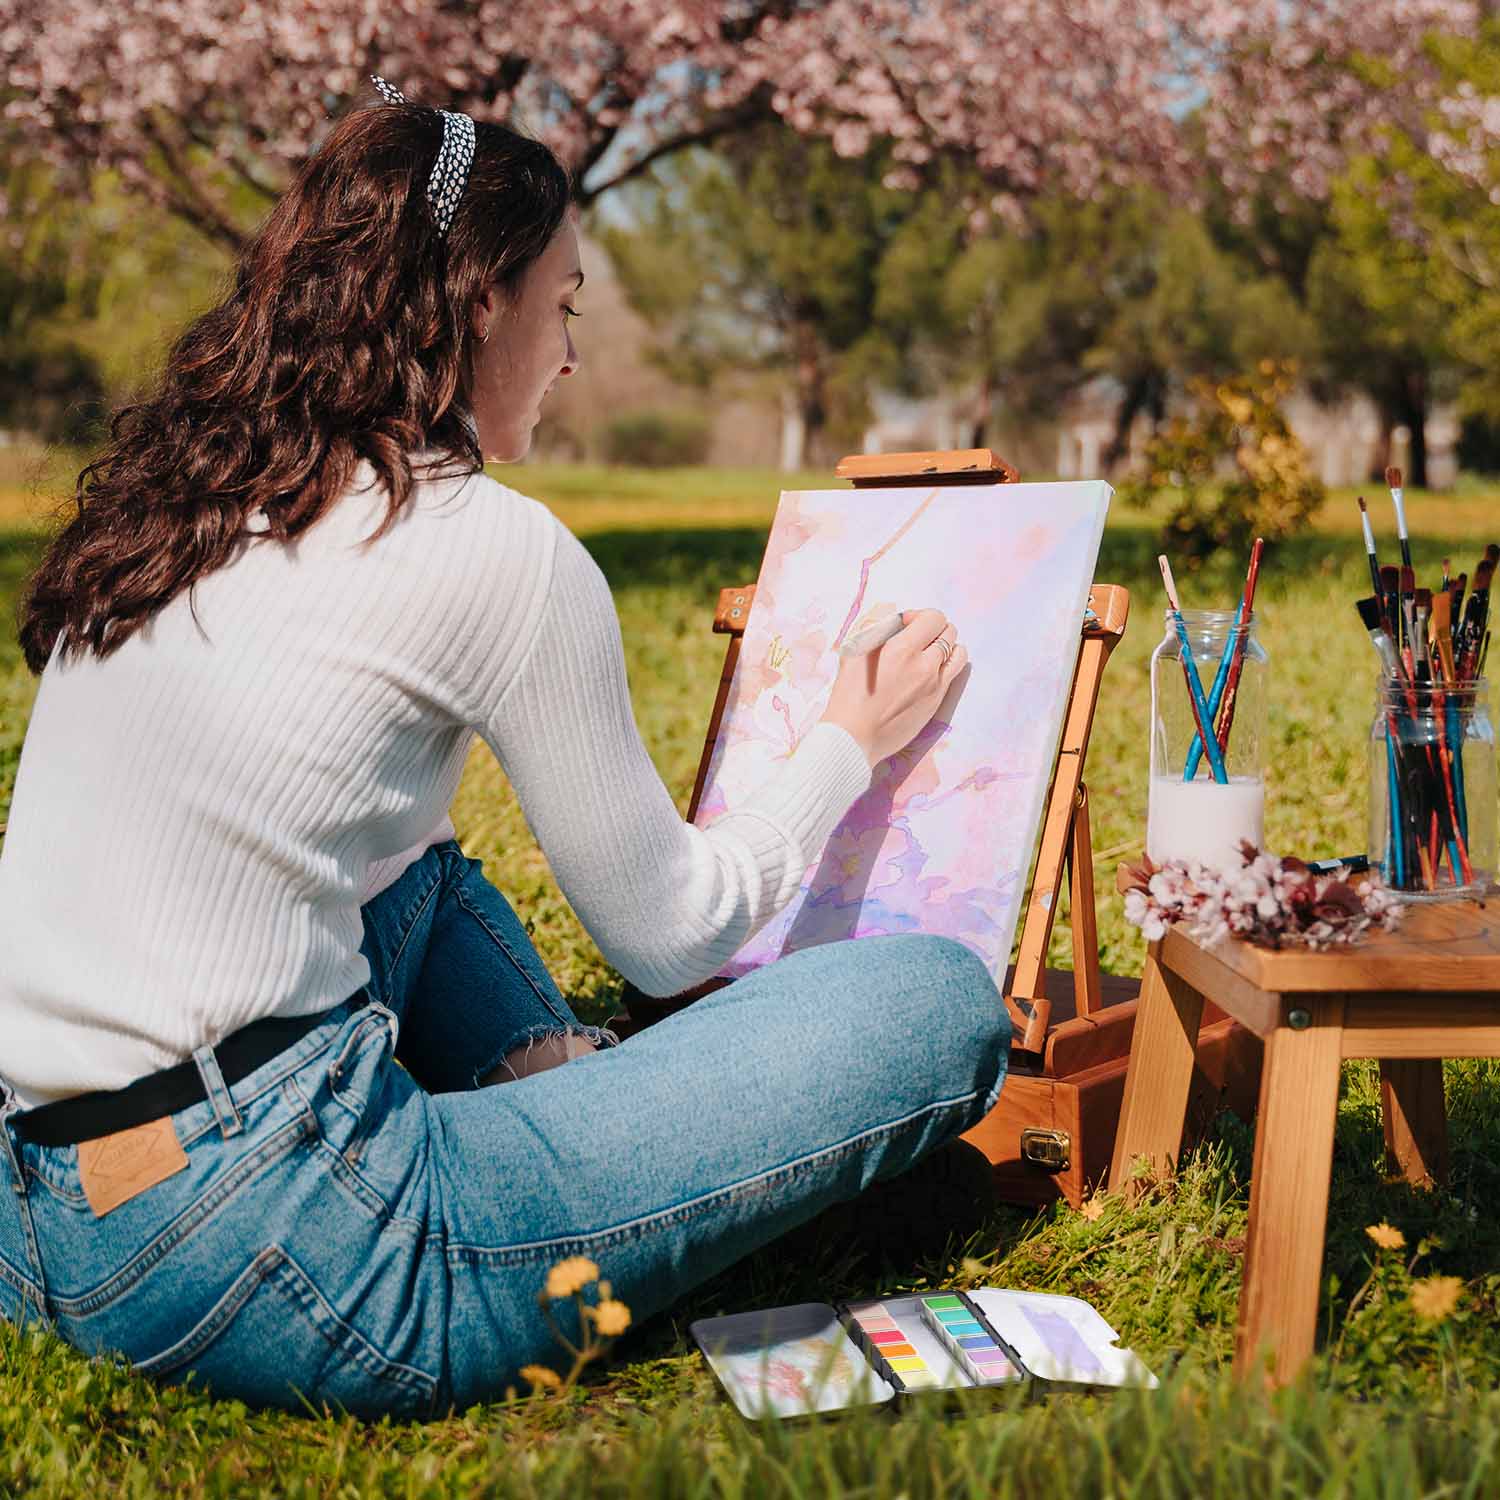 Painting in Nature with Pastel Watercolors 